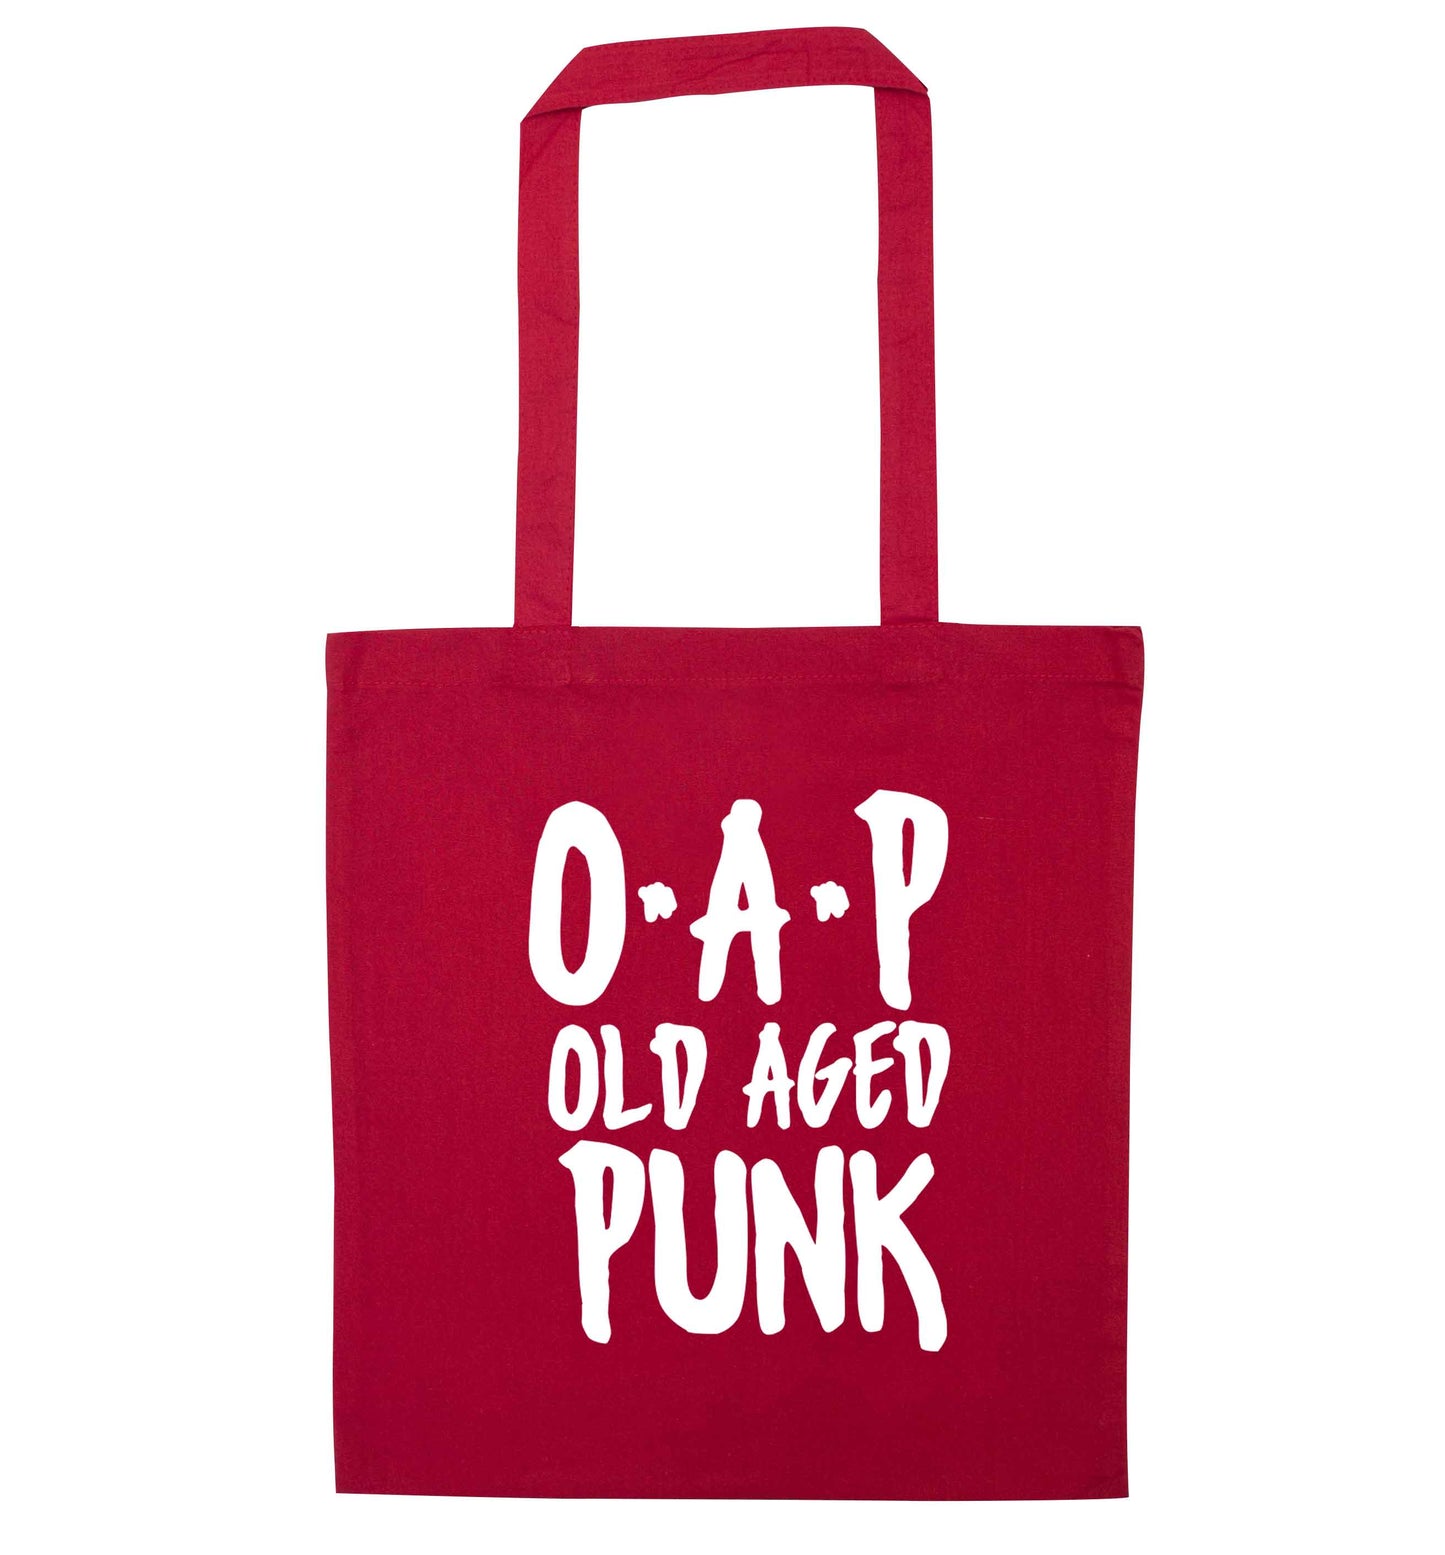 O.A.P Old Age Punk red tote bag